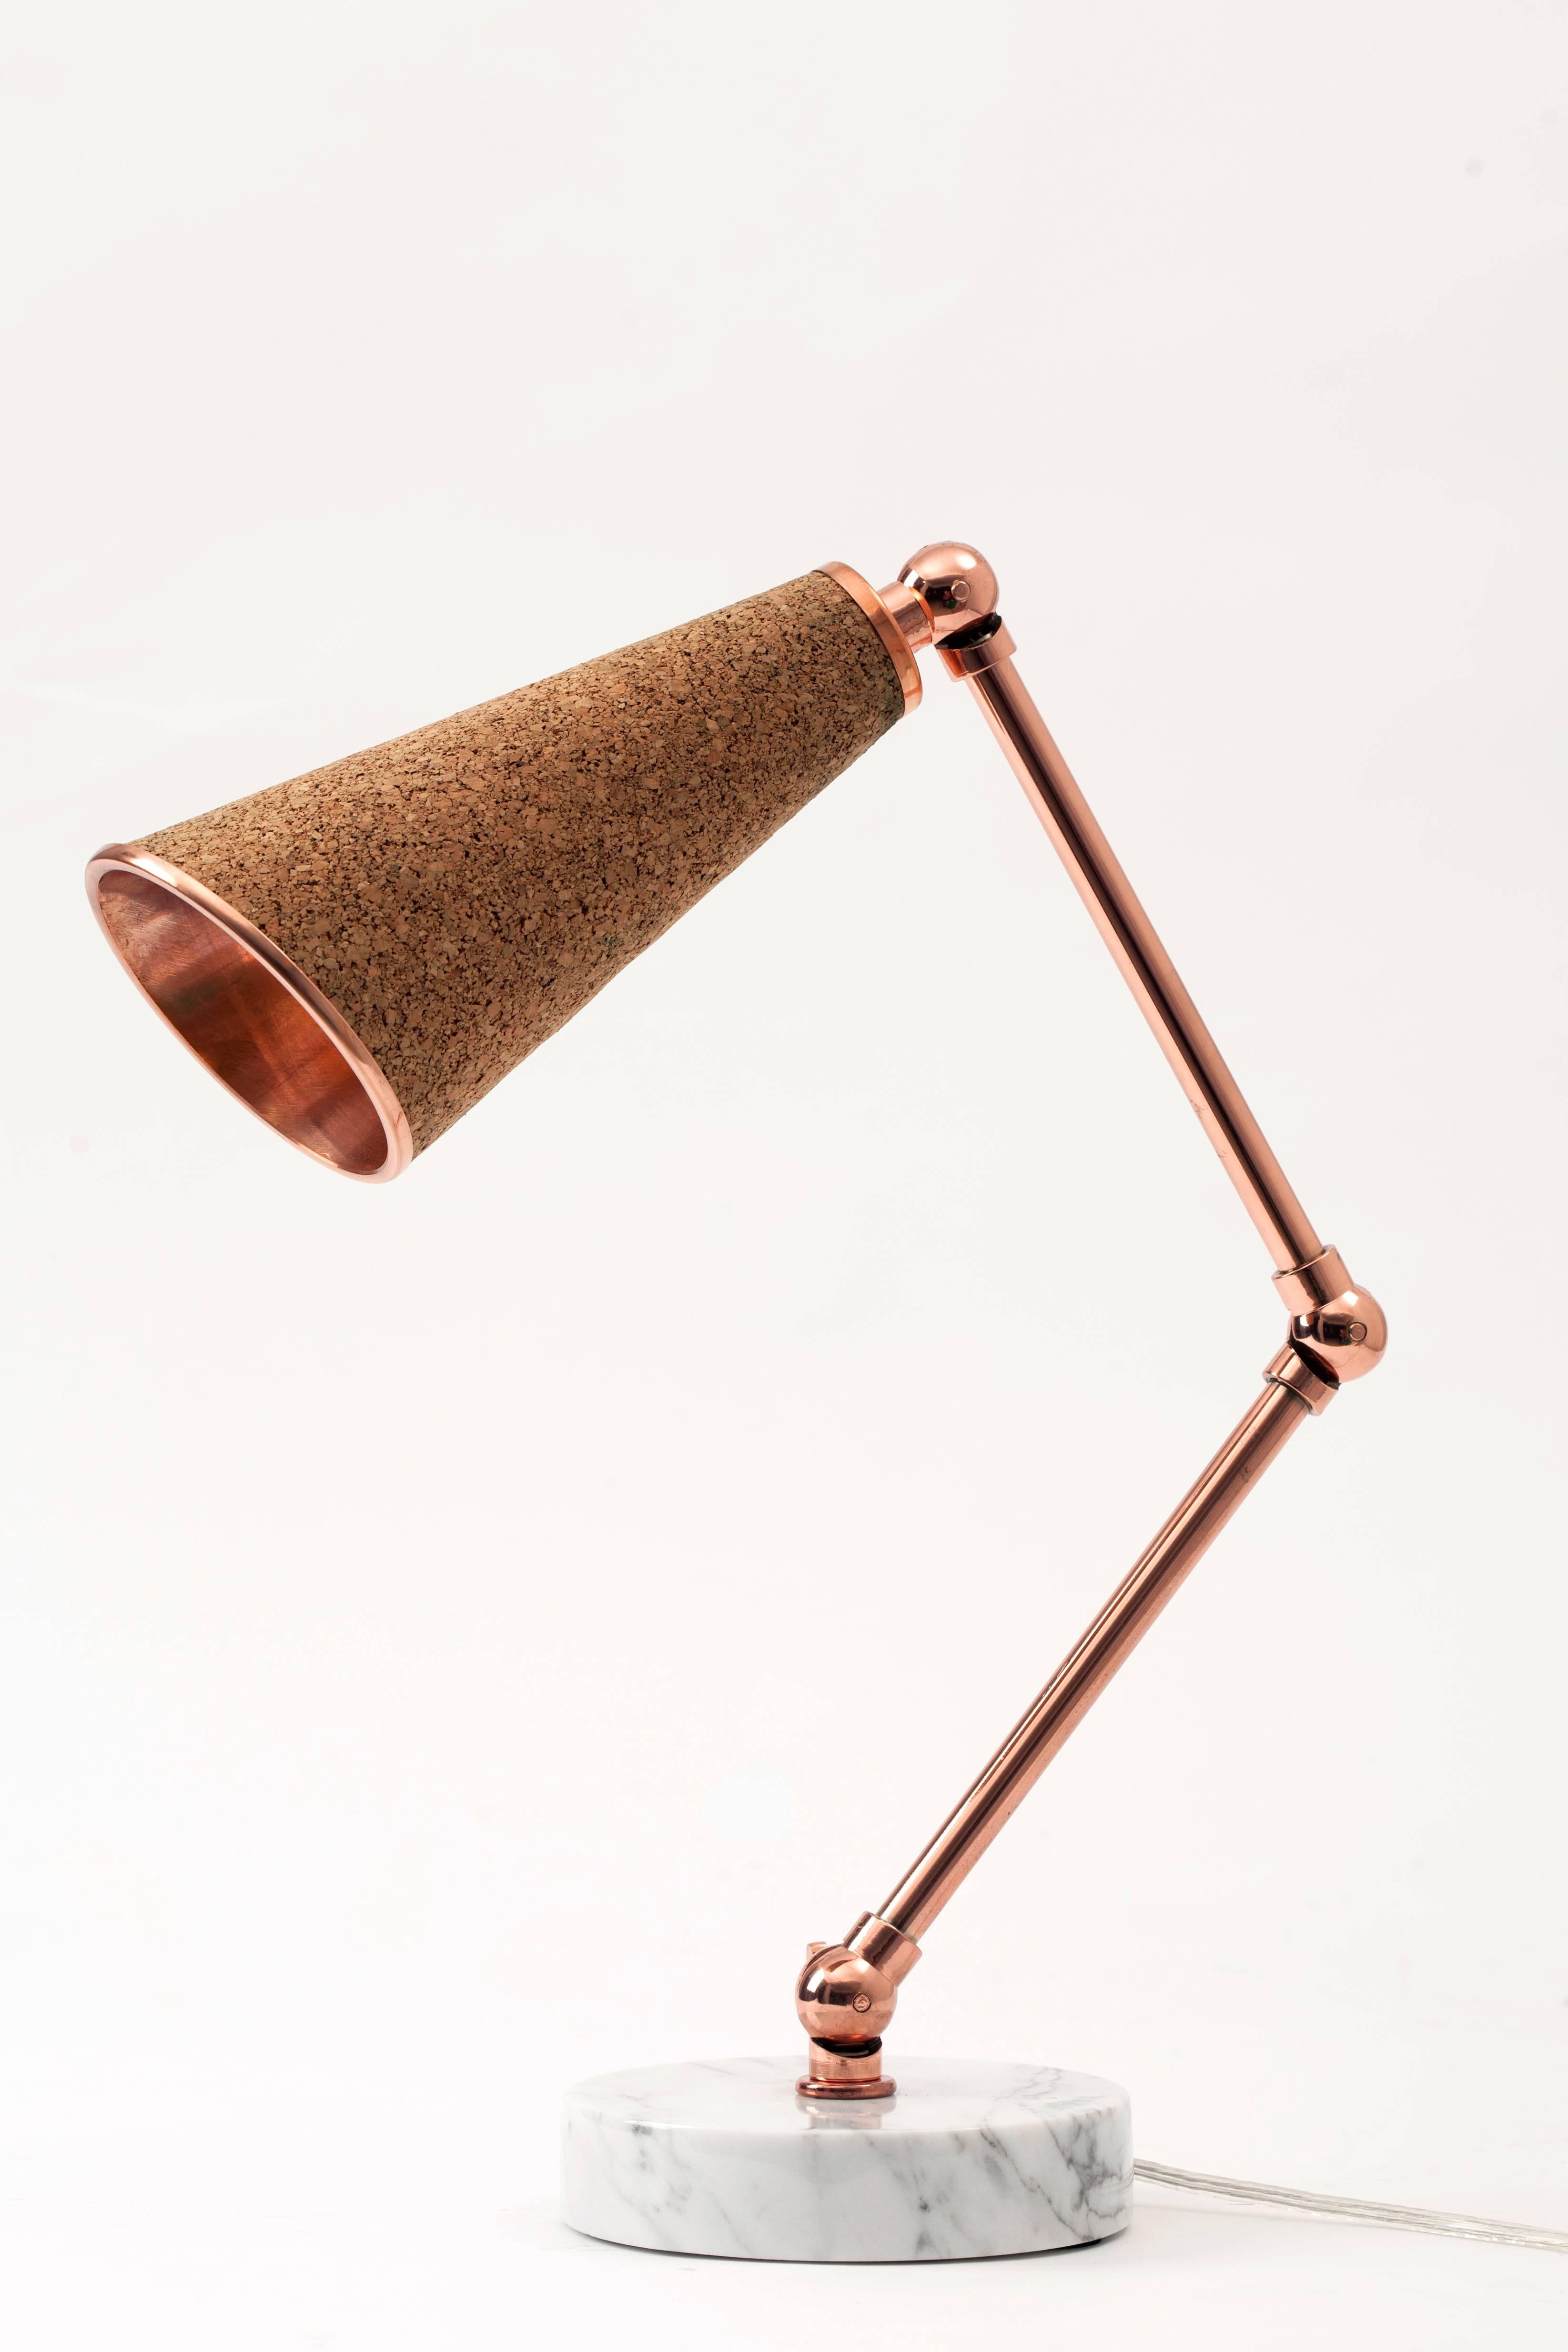 Lanterna Table Lamp in Carrara Marble, Cork and Copper with Adjustable Arms  (Moderne) im Angebot